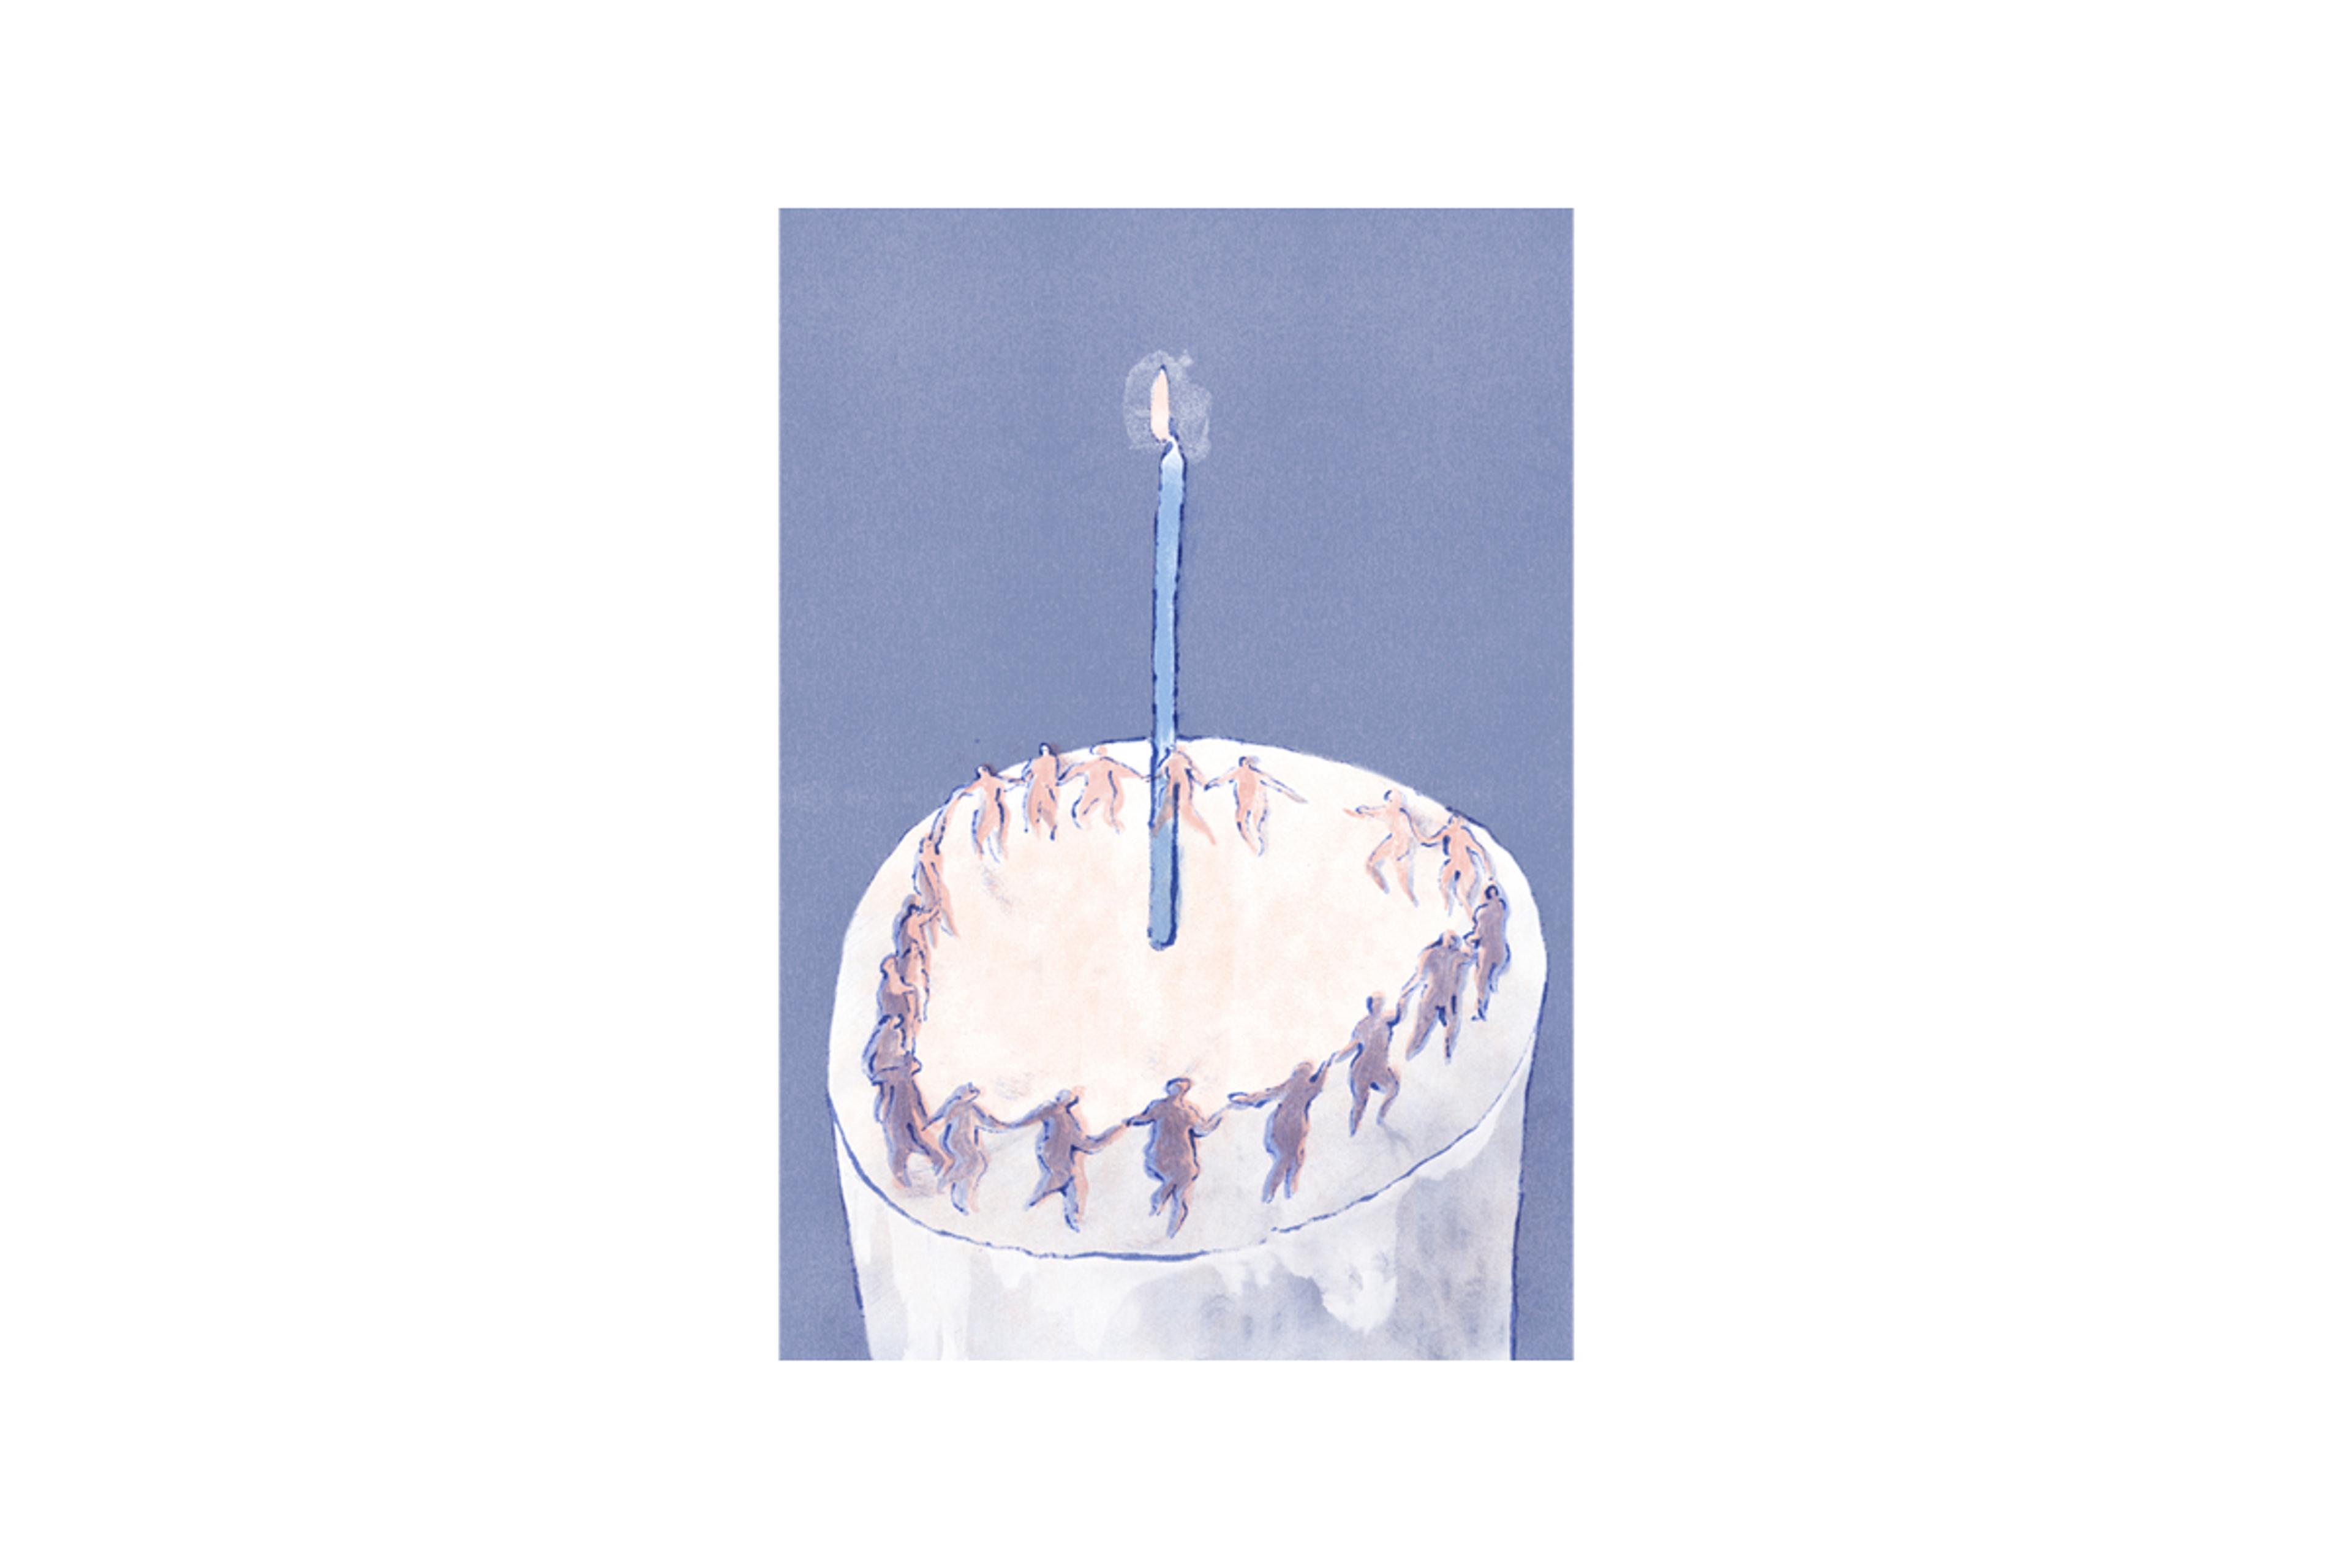 Illustration of people dancing around a candle on top of a birthday cake.